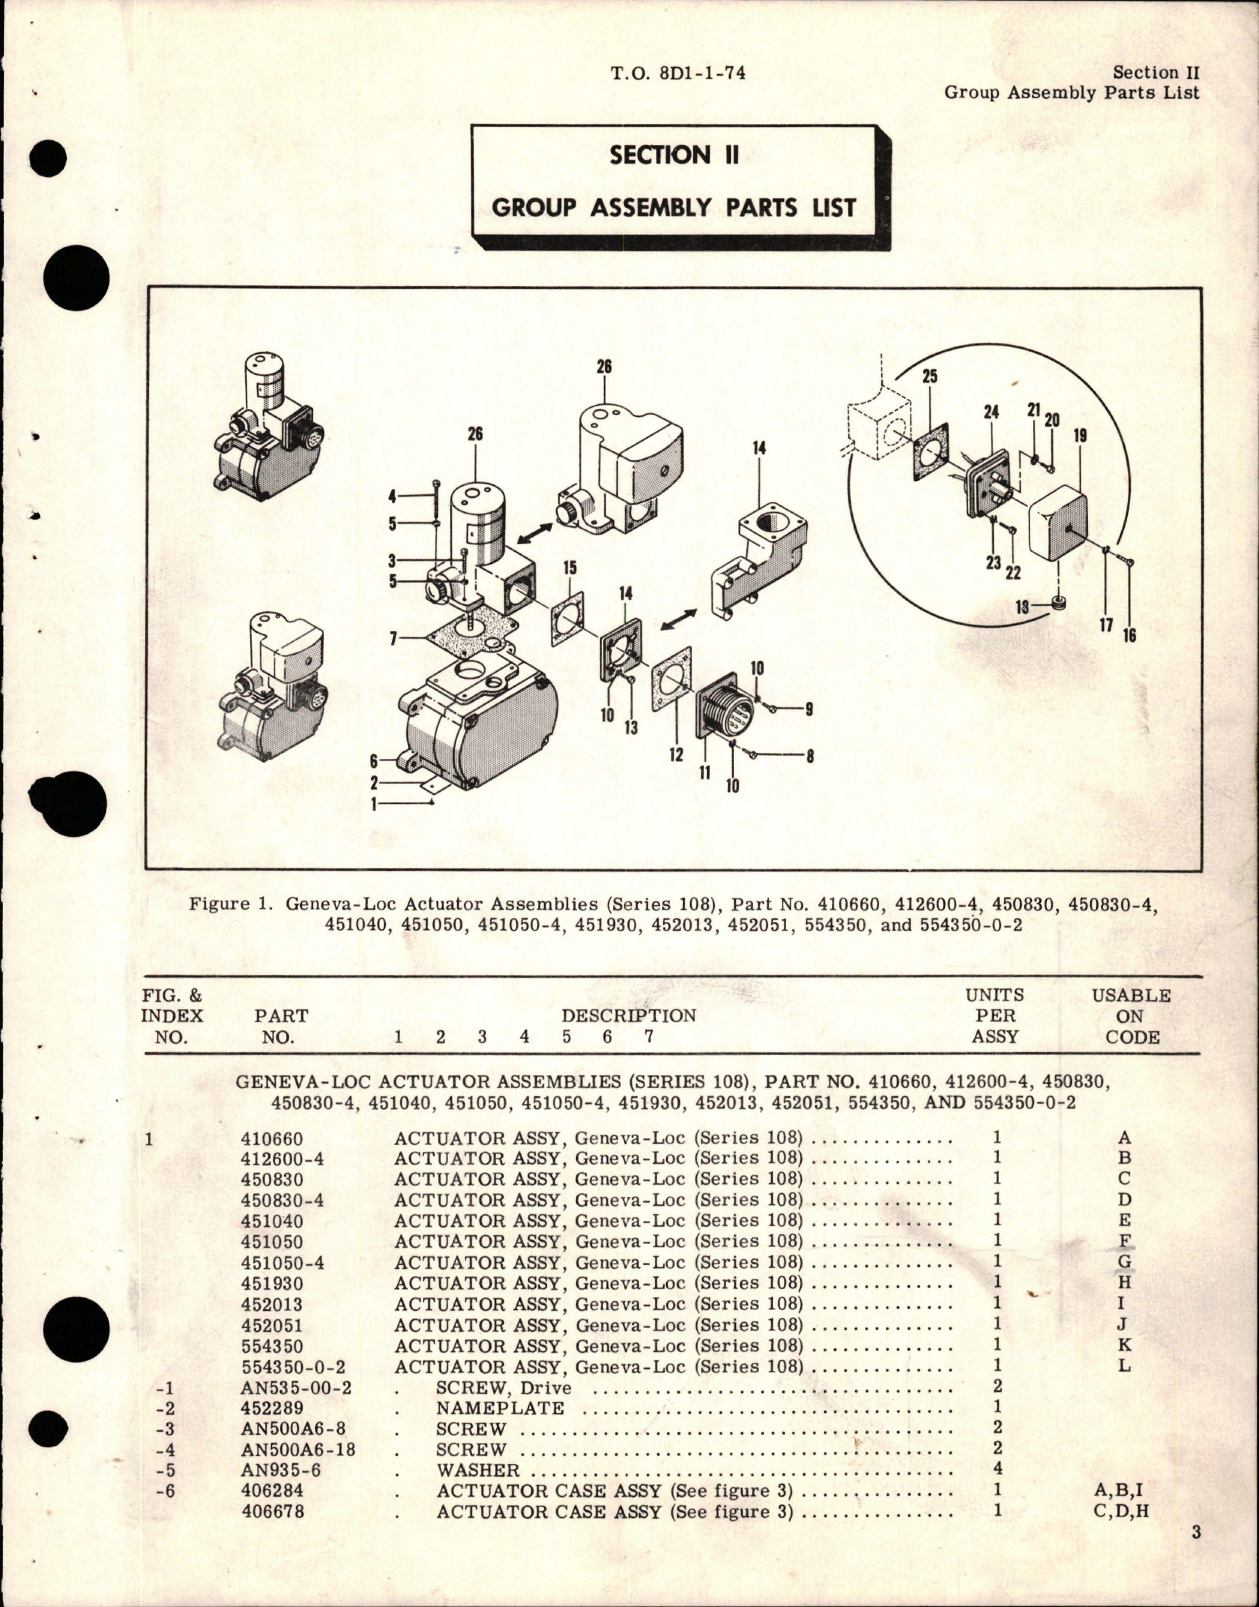 Sample page 5 from AirCorps Library document: Illustrated Parts Breakdown for Geneva-Loc Actuators - Series 108